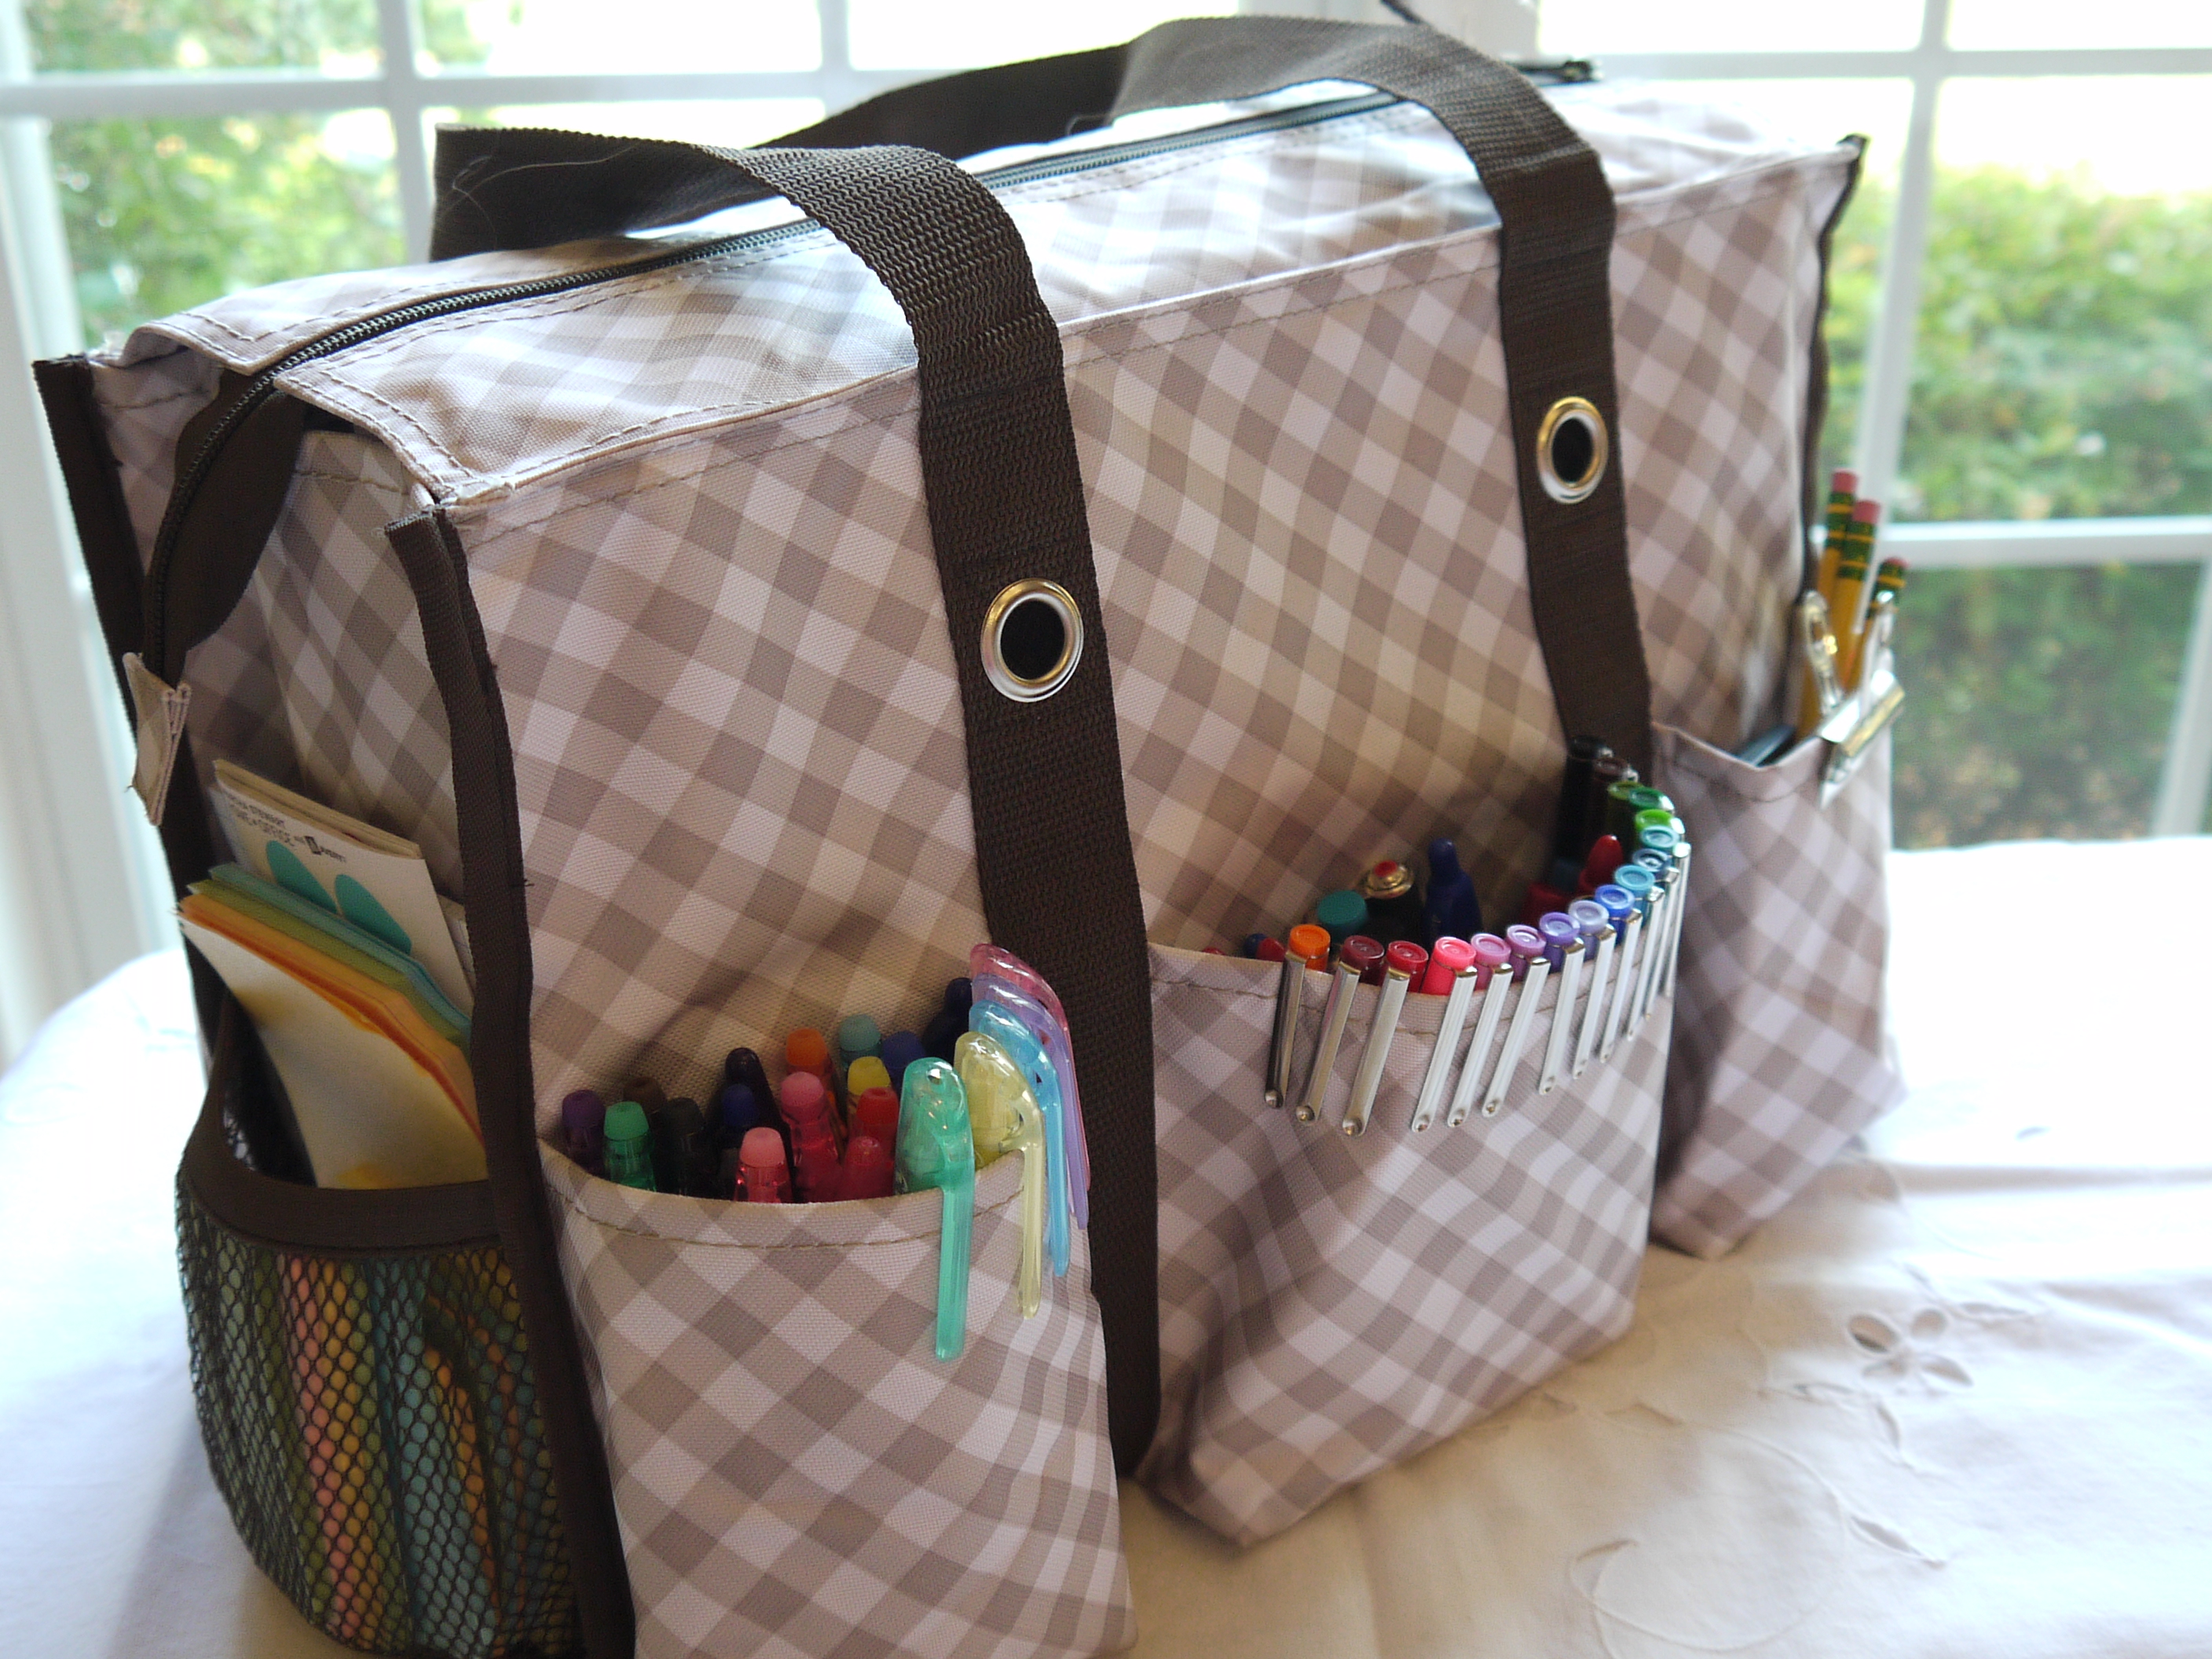 Thirty One Diaper Bag Review